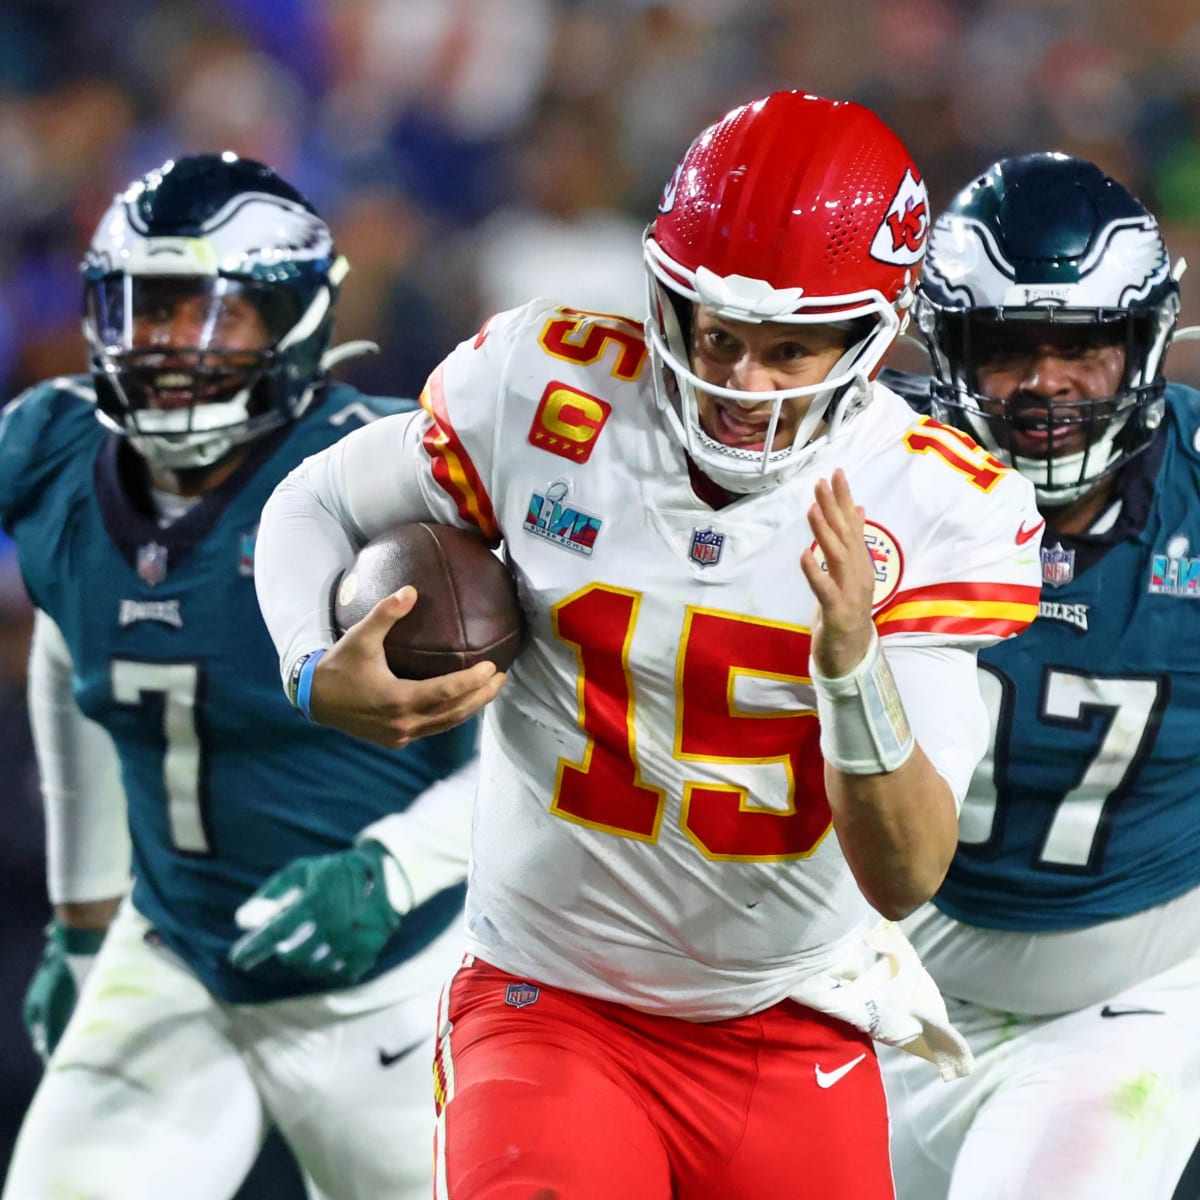 Patrick Mahomes leads Chiefs to Super Bowl title with late rally